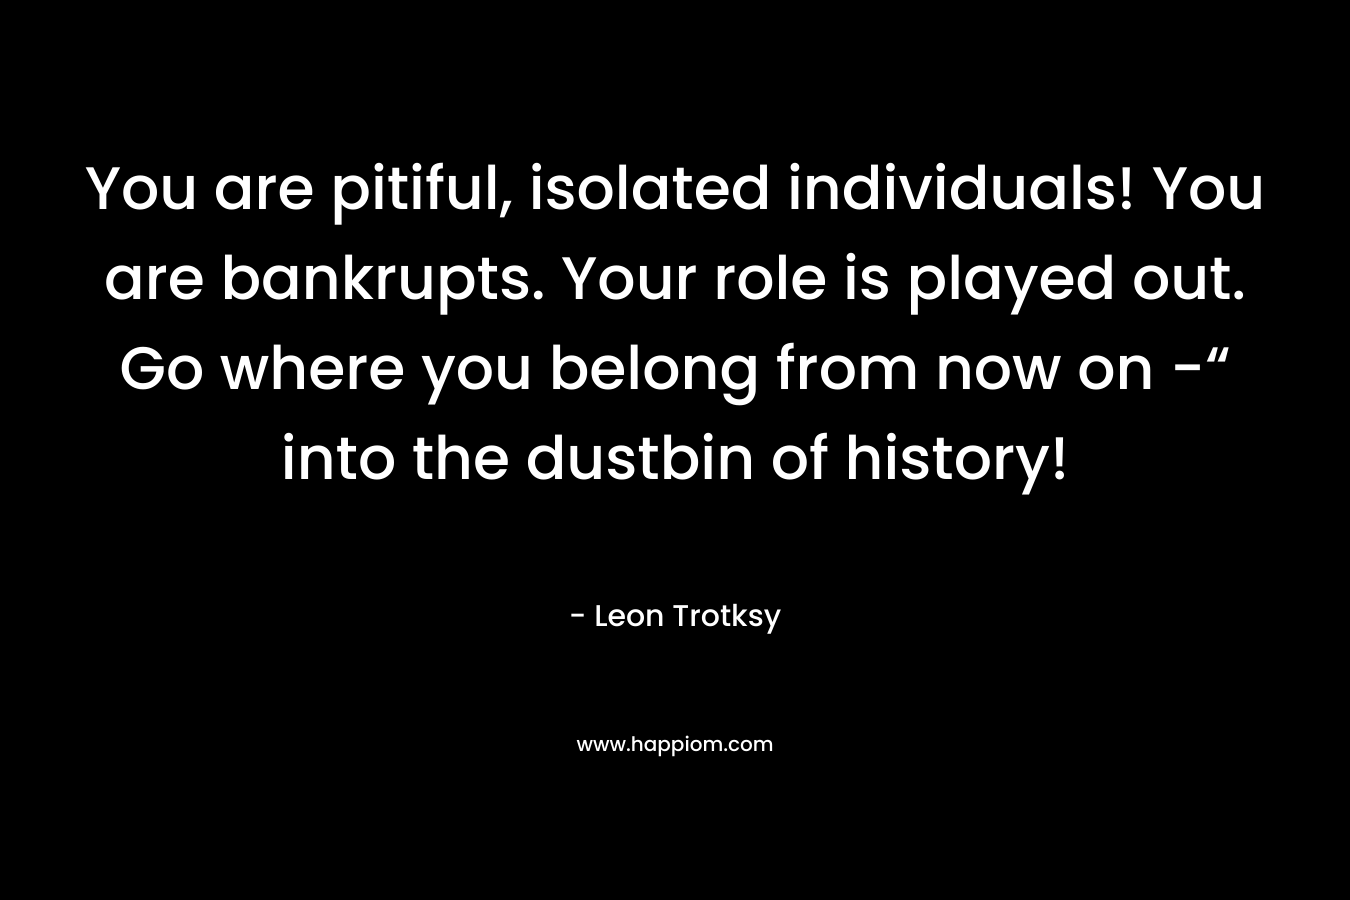 You are pitiful, isolated individuals! You are bankrupts. Your role is played out. Go where you belong from now on -“ into the dustbin of history!